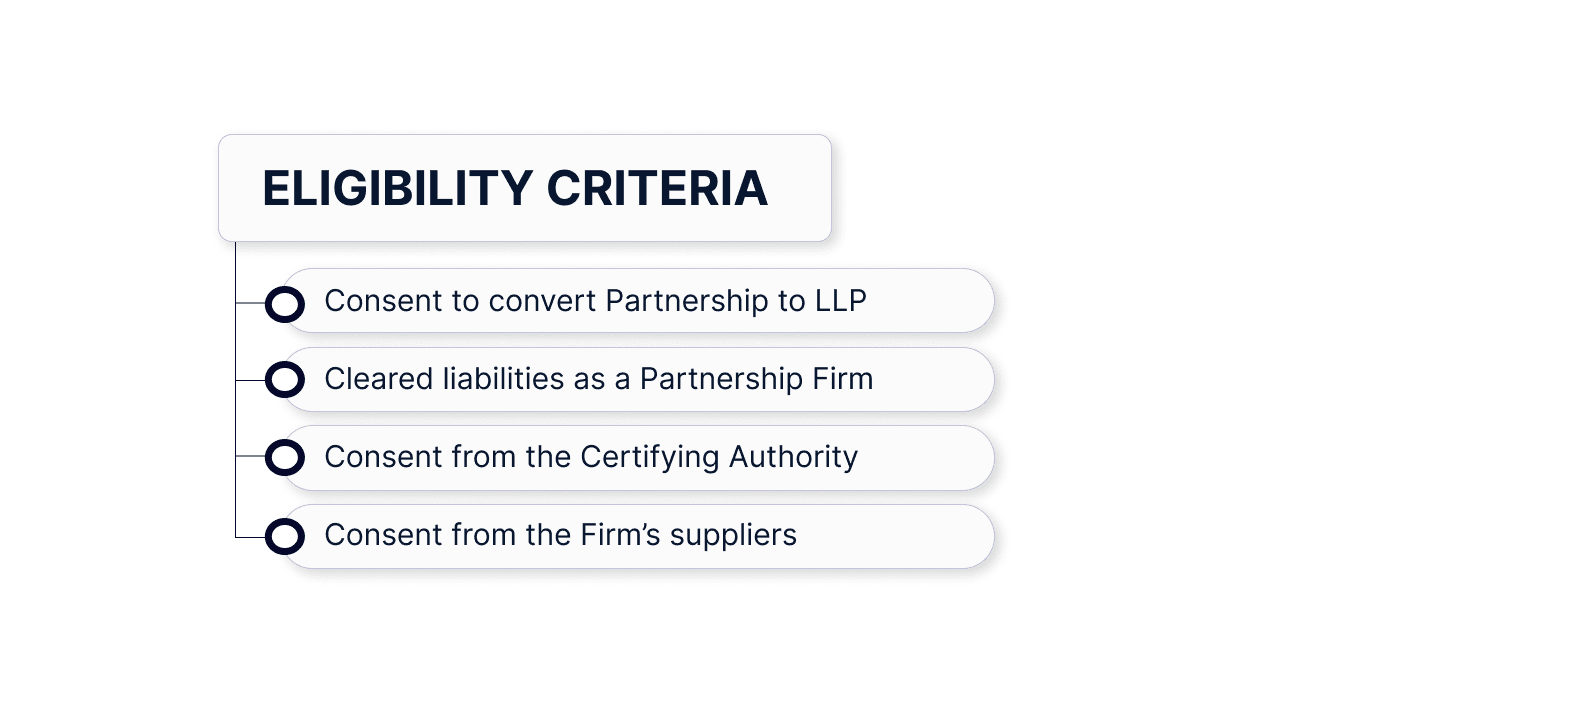 Eligibility criteria to Convert Partnership into an LLP in India